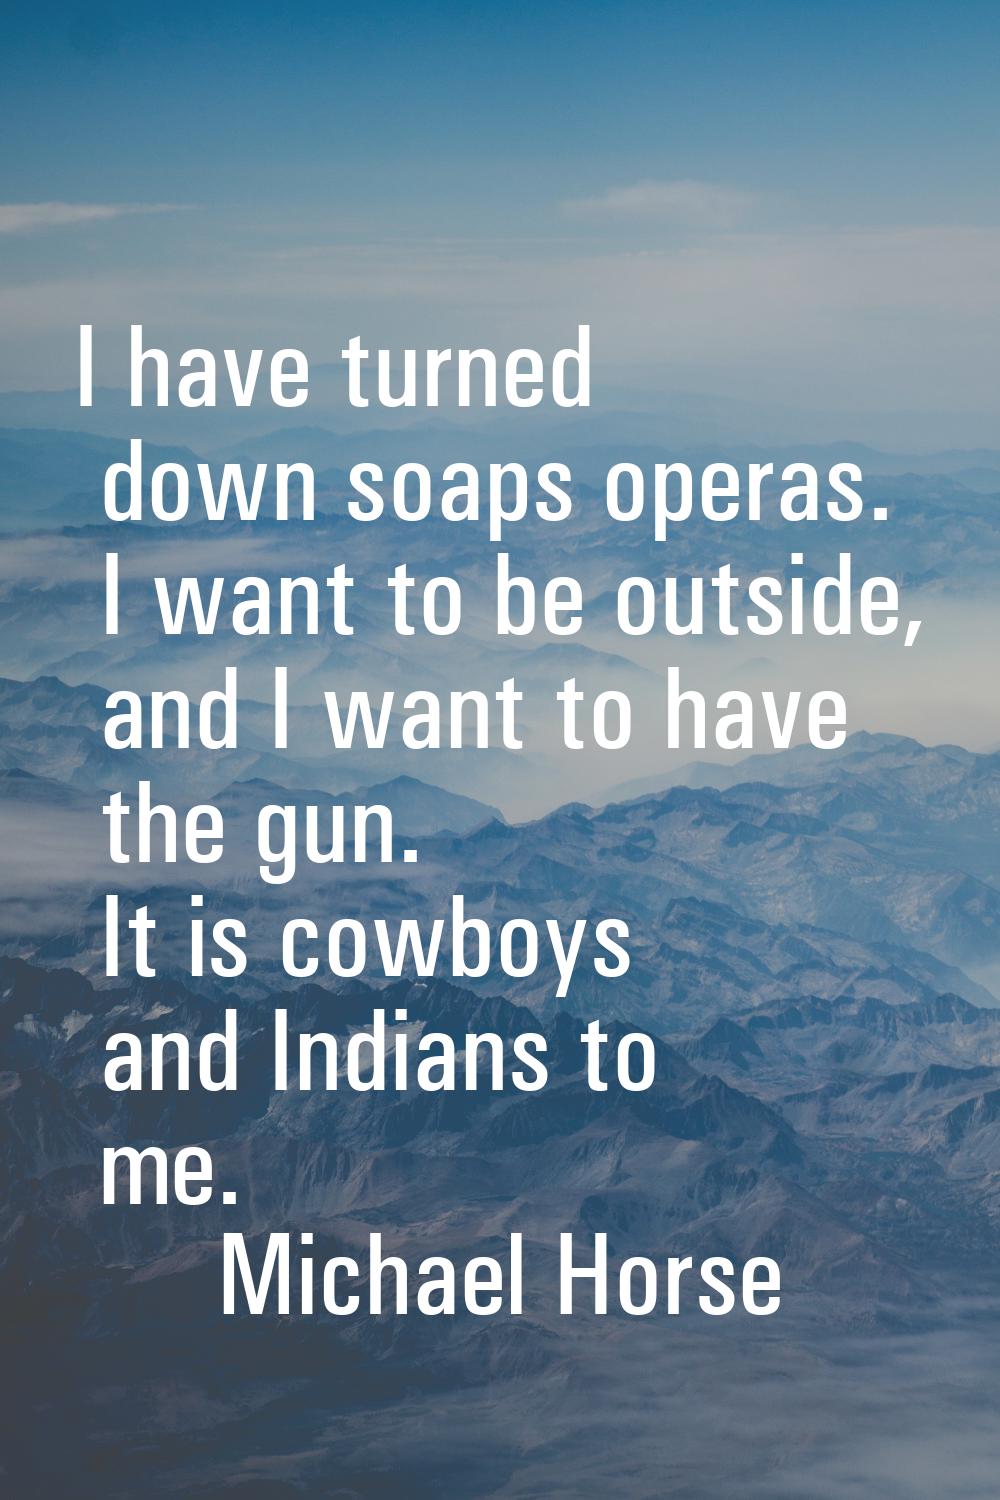 I have turned down soaps operas. I want to be outside, and I want to have the gun. It is cowboys an